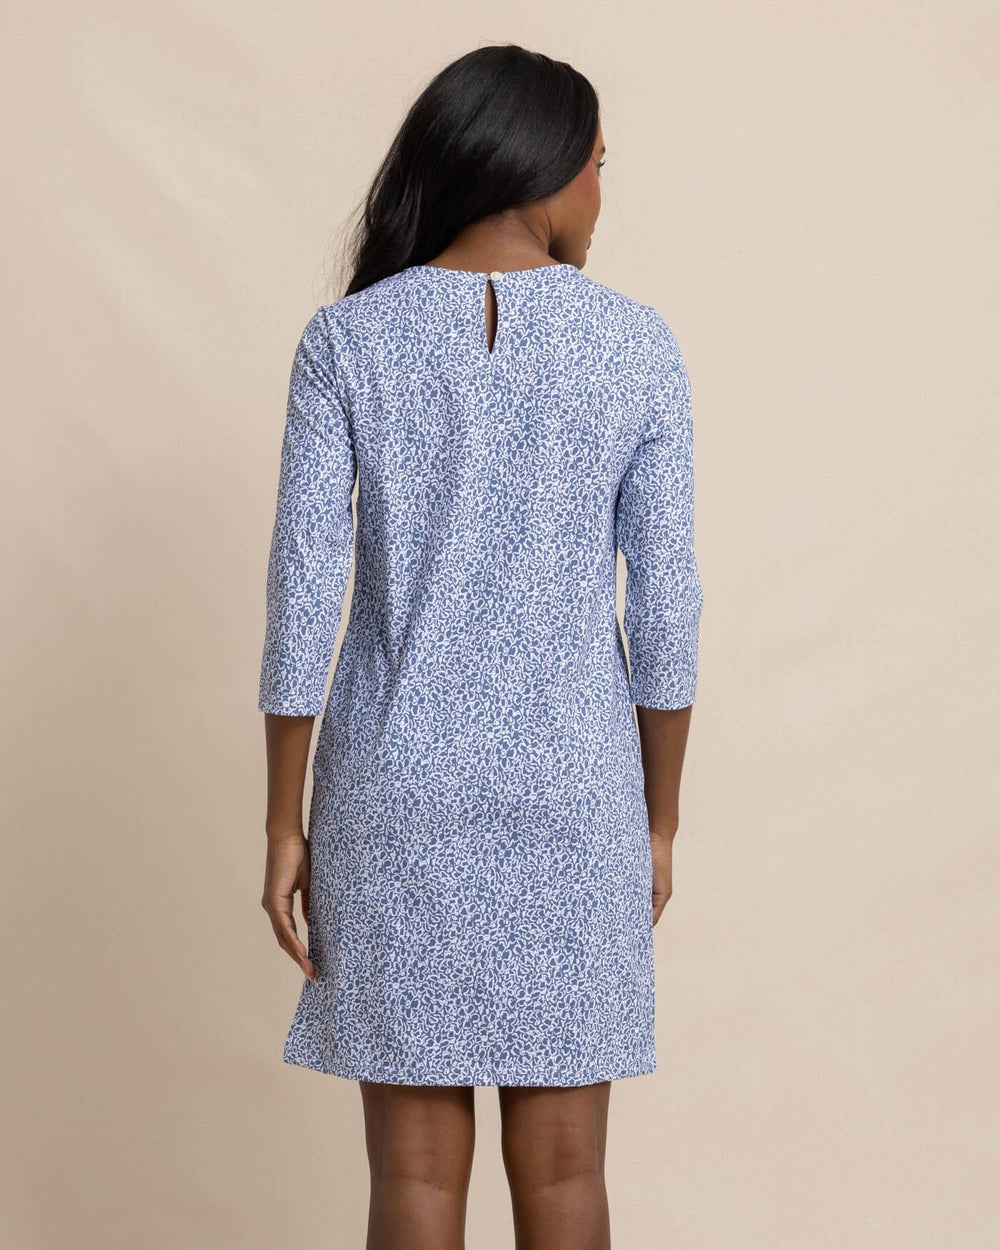 The back view of the Southern Tide Leira That Floral Feeling Print Performance Dress by Southern Tide - Coronet Blue